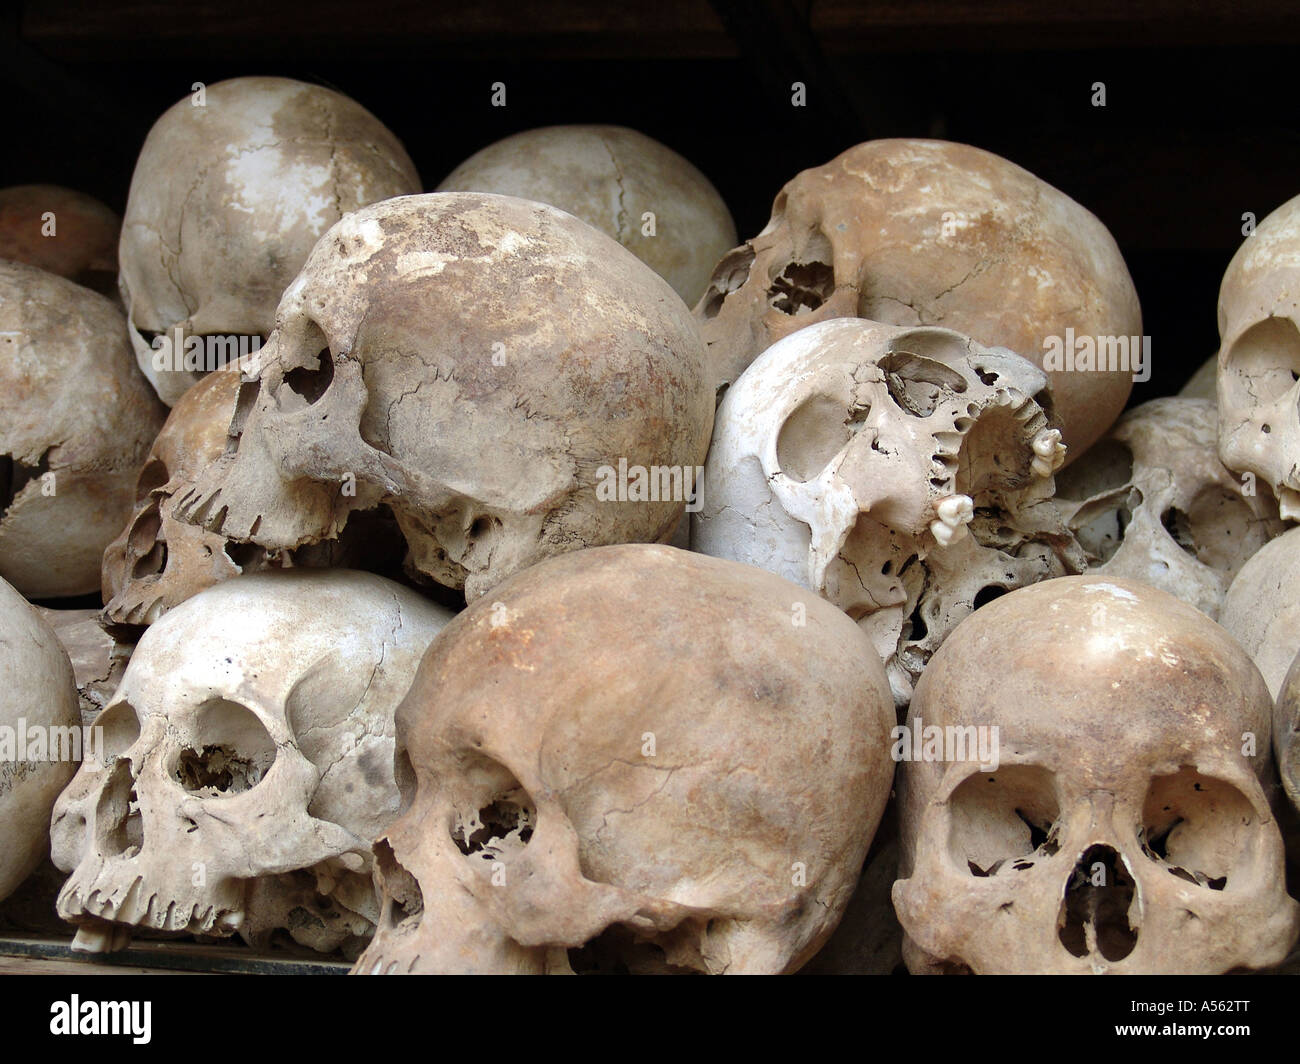 Painet ix2026 cambodia skulls people murdered by khmer rouge killing fields national monument pnom penh country developing Stock Photo